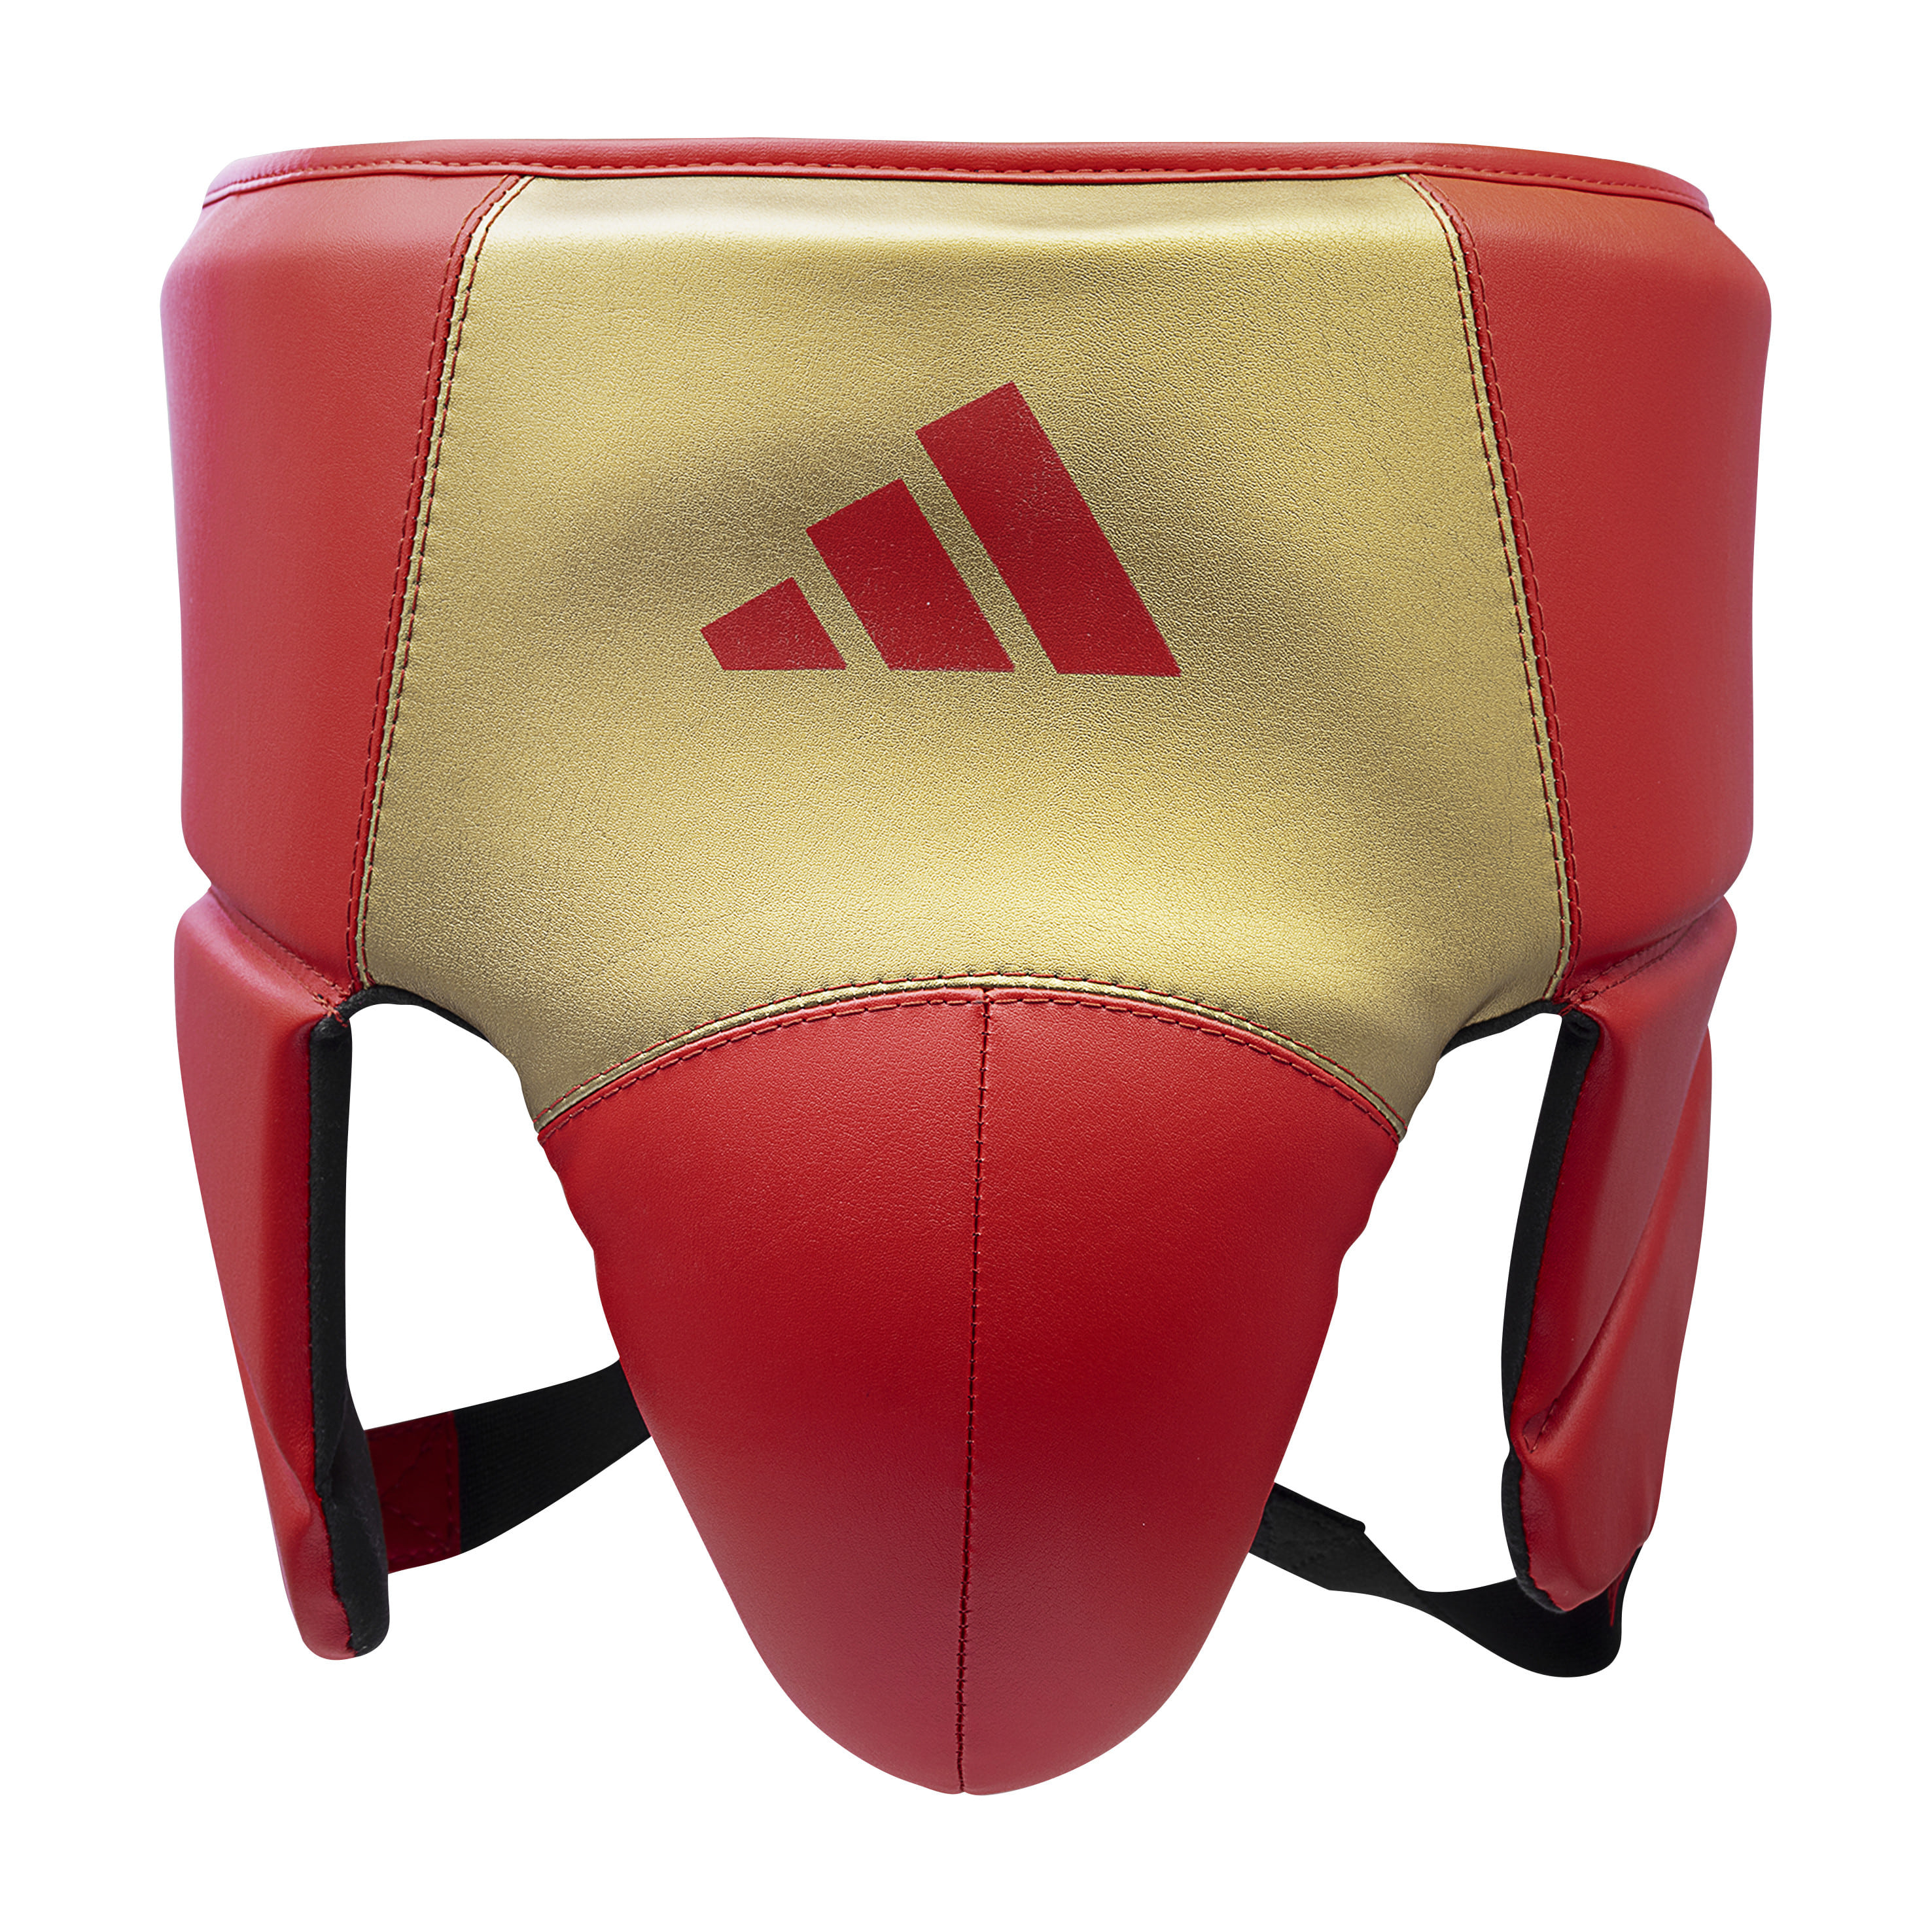 Pro Speed Groin Guard - RED/GOLD